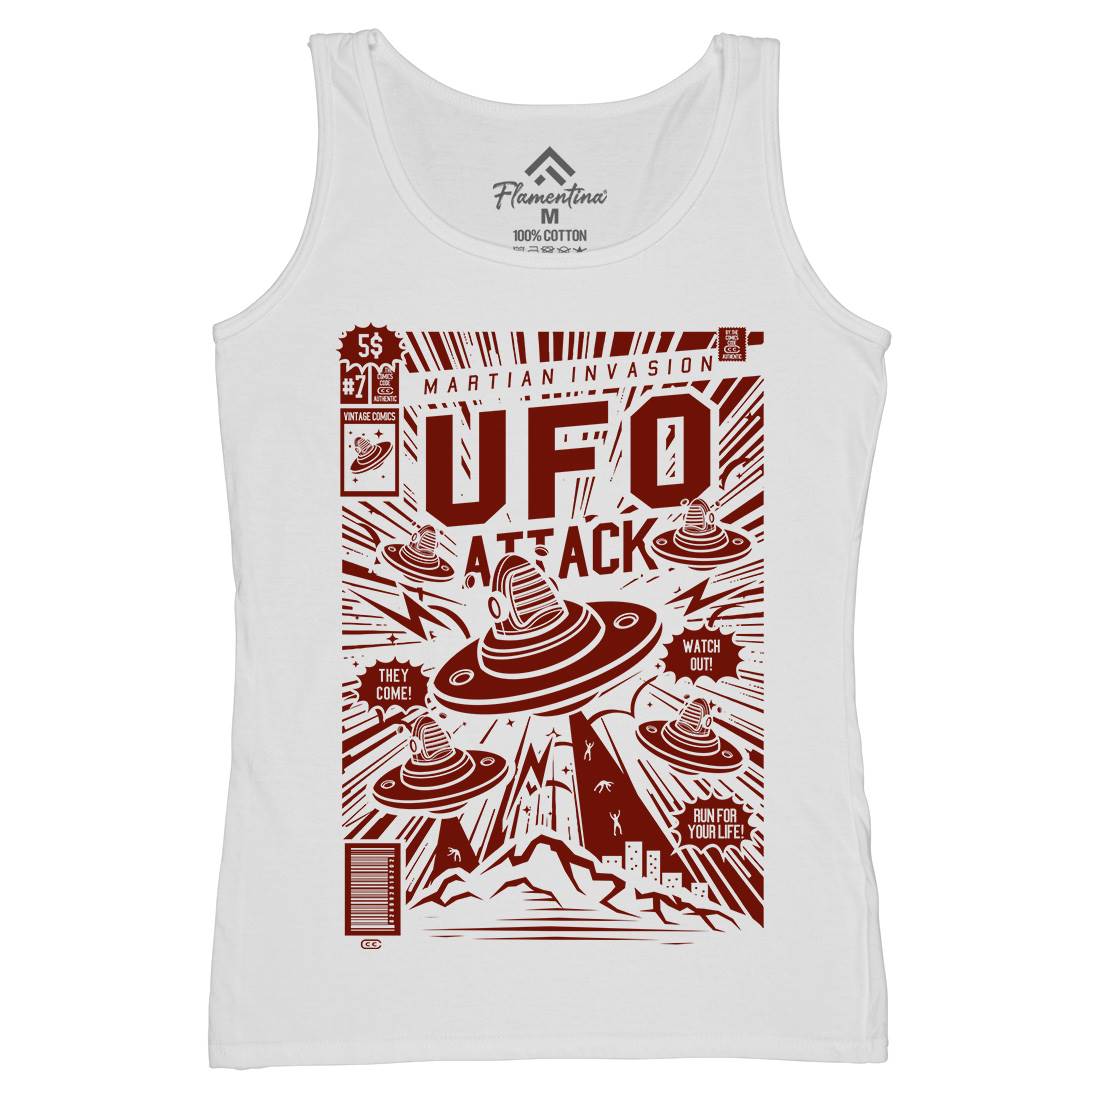 Ufo Attack Womens Organic Tank Top Vest Space A296